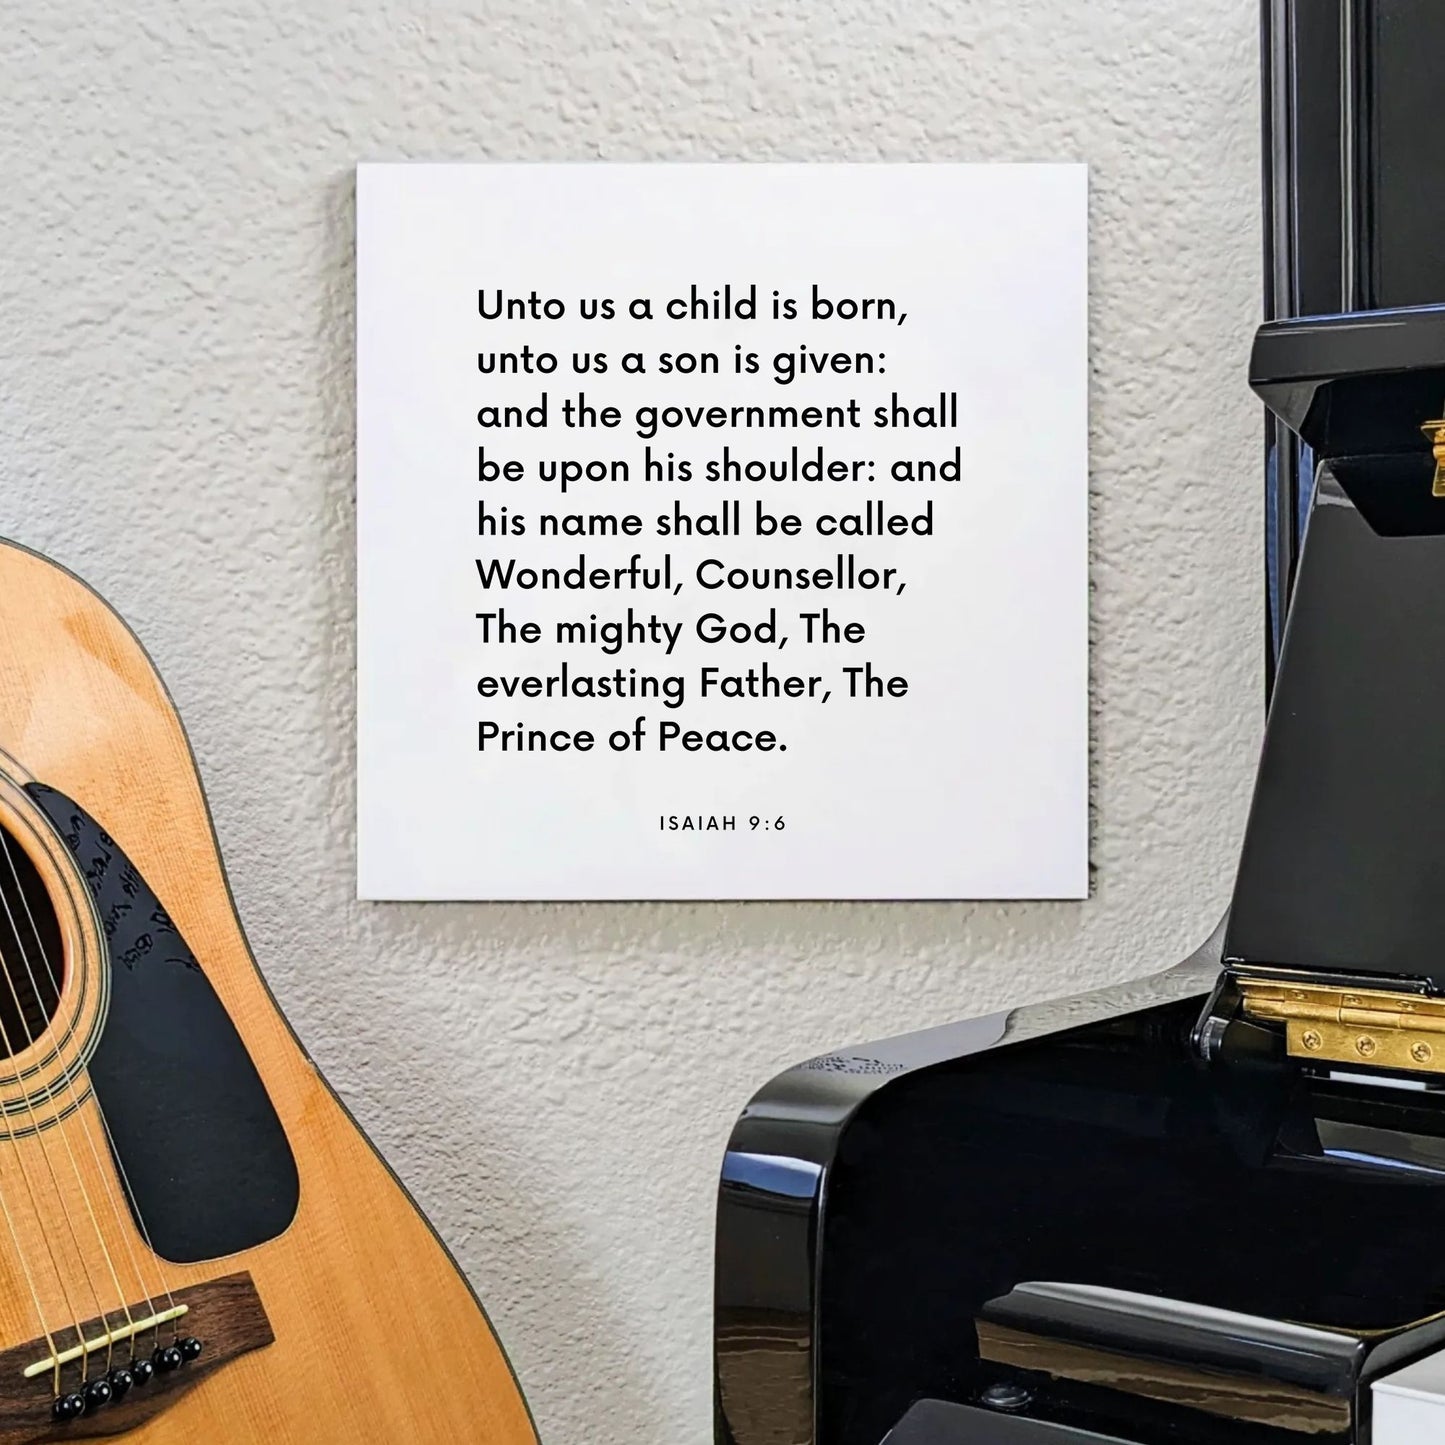 Music mouting of the scripture tile for Isaiah 9:6 - "Unto us a child is born, unto us a son is given"